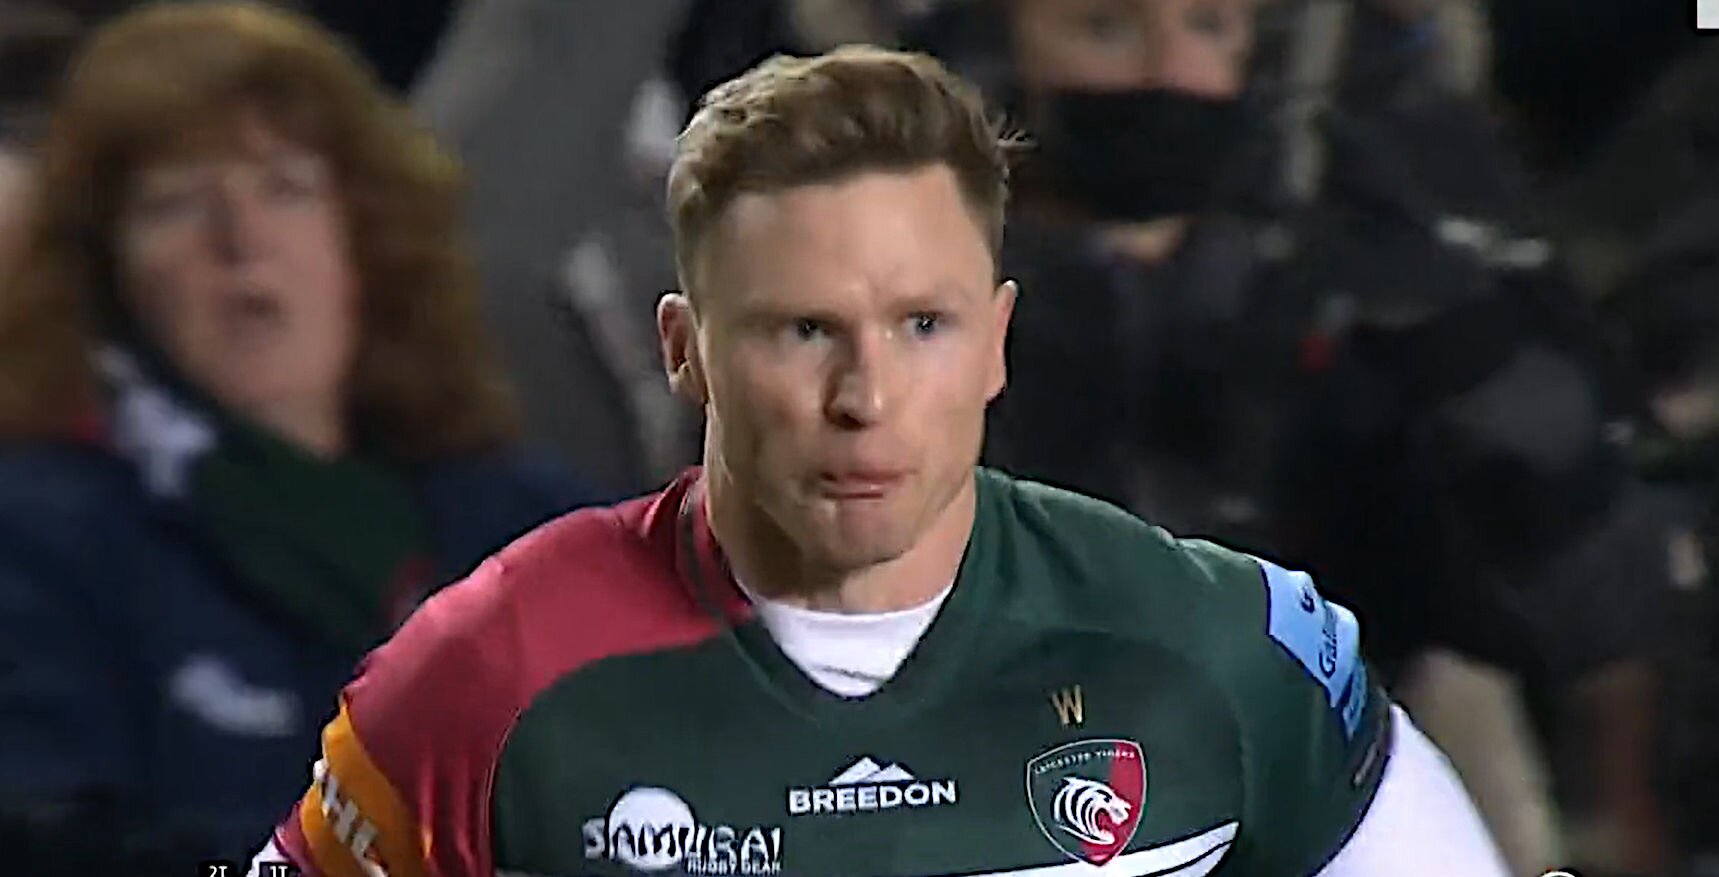 Seconds into his debut, Chris Ashton desecrates Welford Road